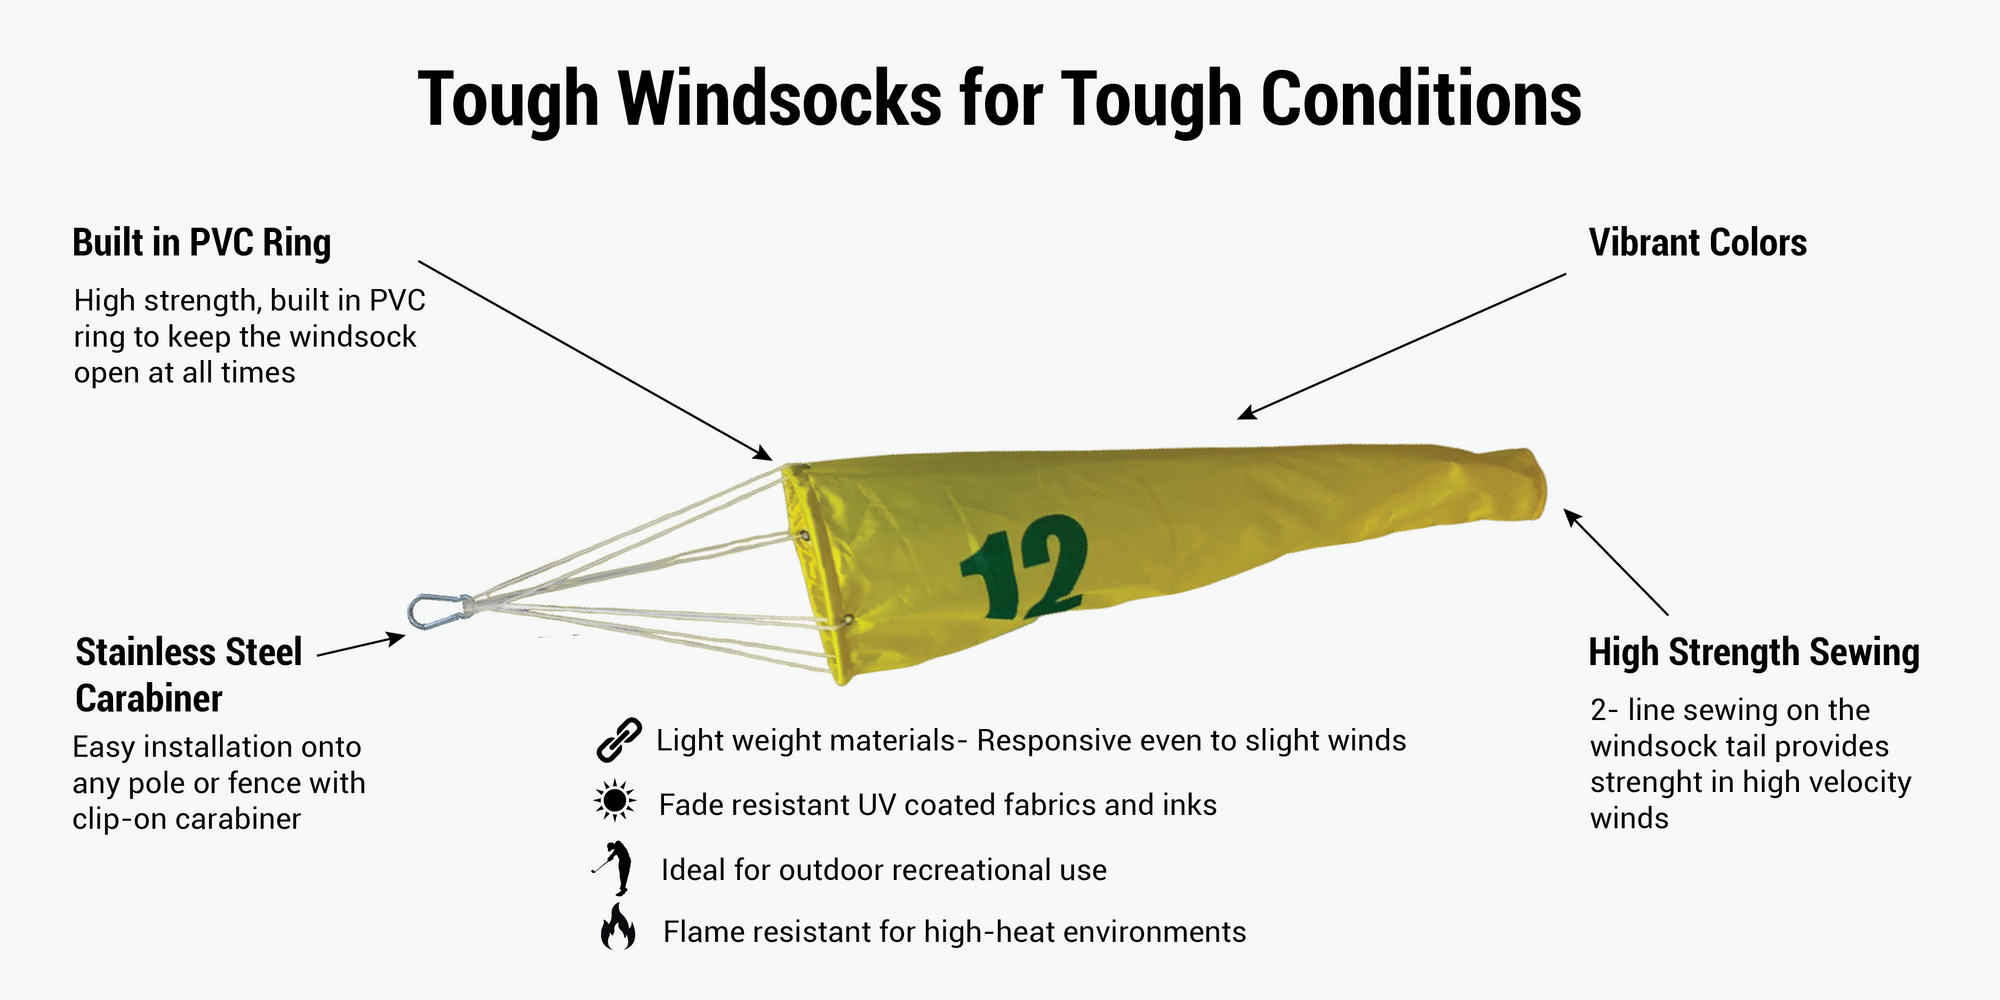 Golf Pin Lightweight windsock infographic for golf courses, driving ranges and frisbee gold courses. Great for showing hold number and windsock shows wind direction and speed